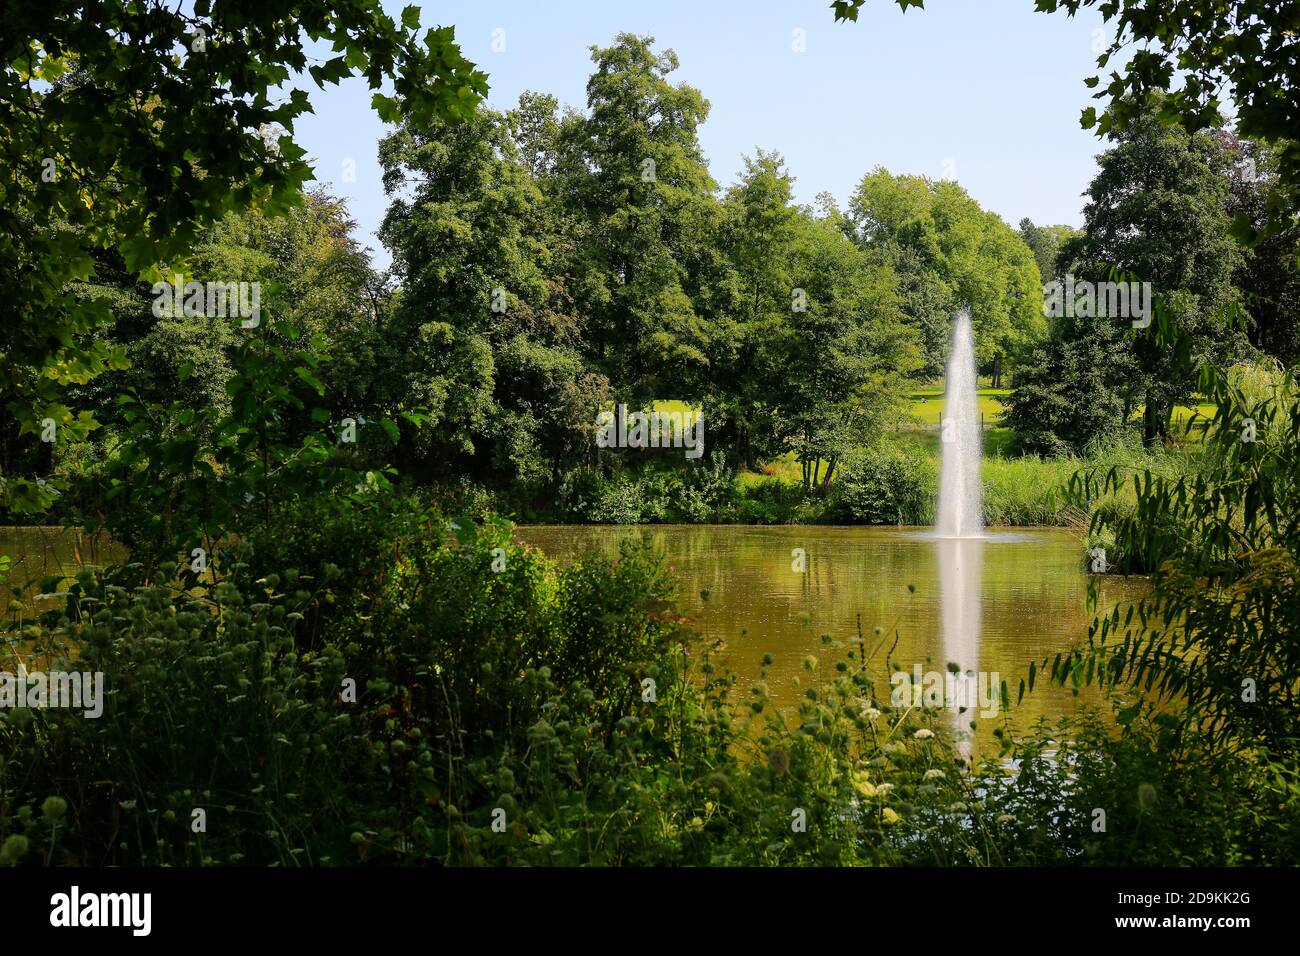 Essen, North Rhine-Westphalia, Ruhr Area, Germany, park, here the Volksgarten Kray, photographed on the occasion of the Essen 2017 Green Capital of Europe. Stock Photo